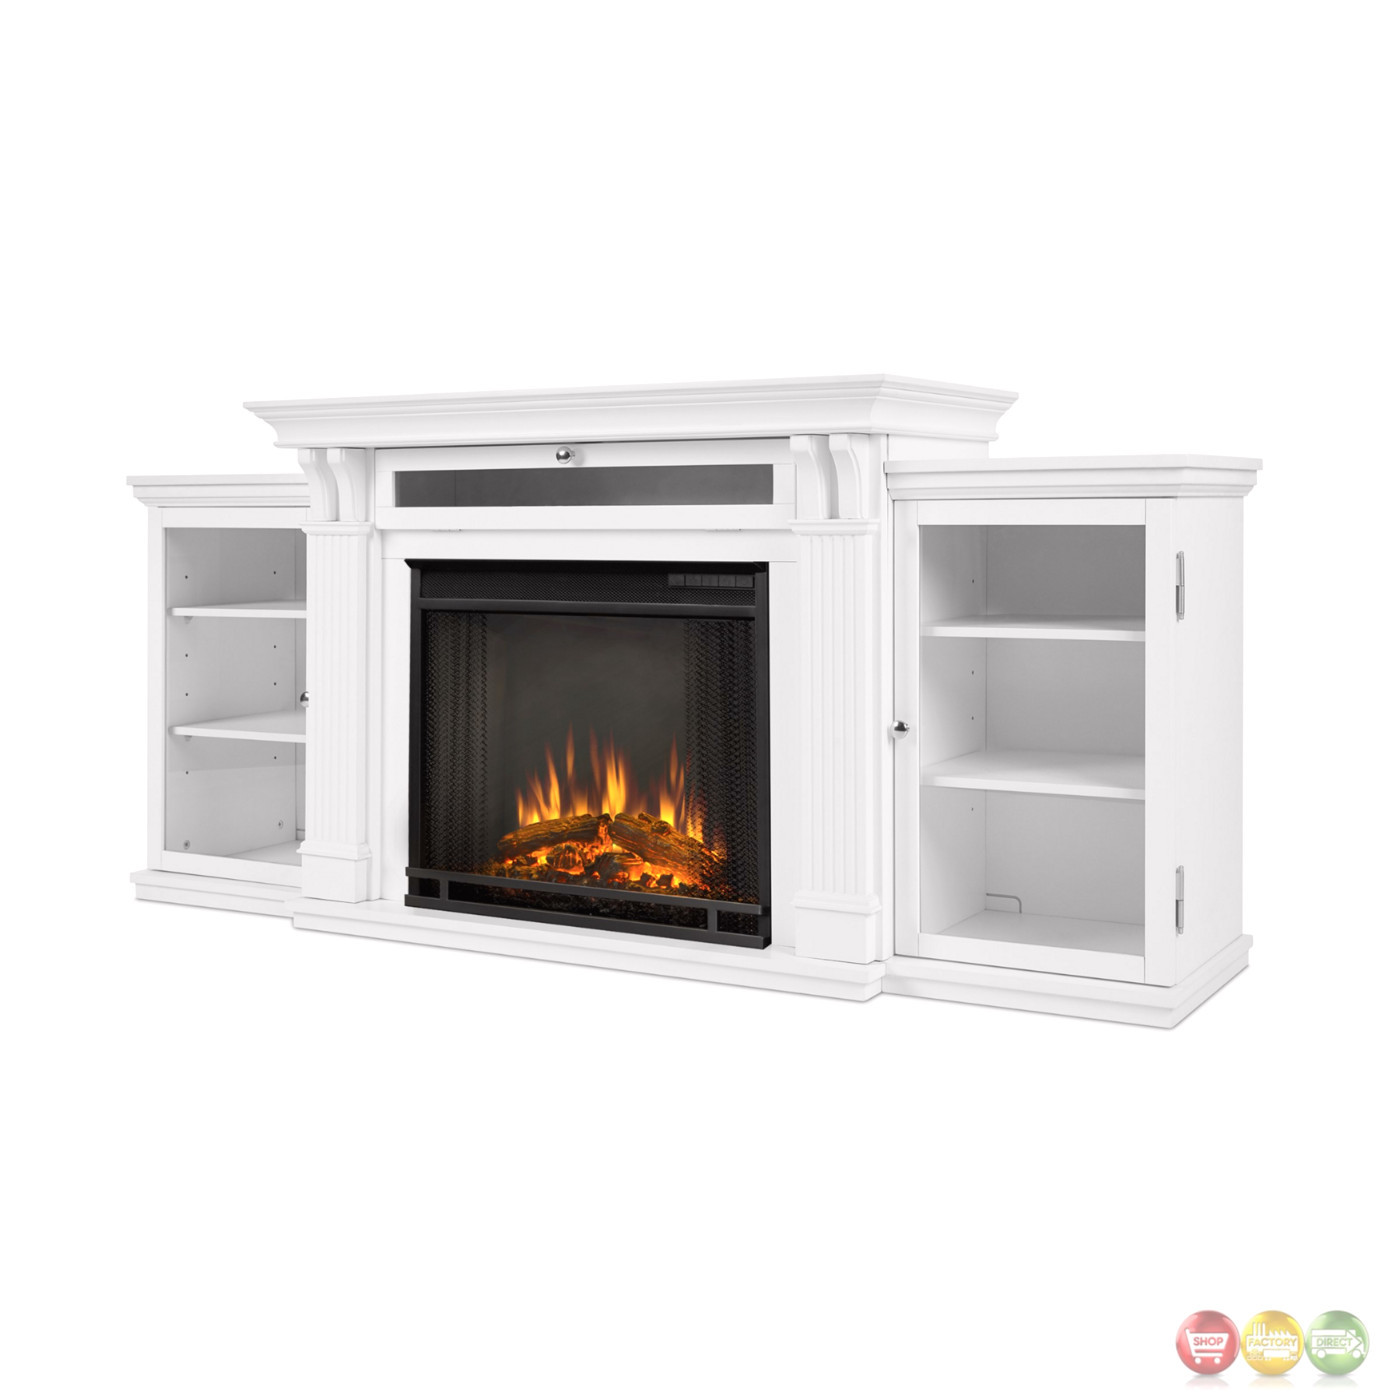 White Electric Fireplace Entertainment Center
 Calie Entertainment Center Electric Led Heater Fireplace